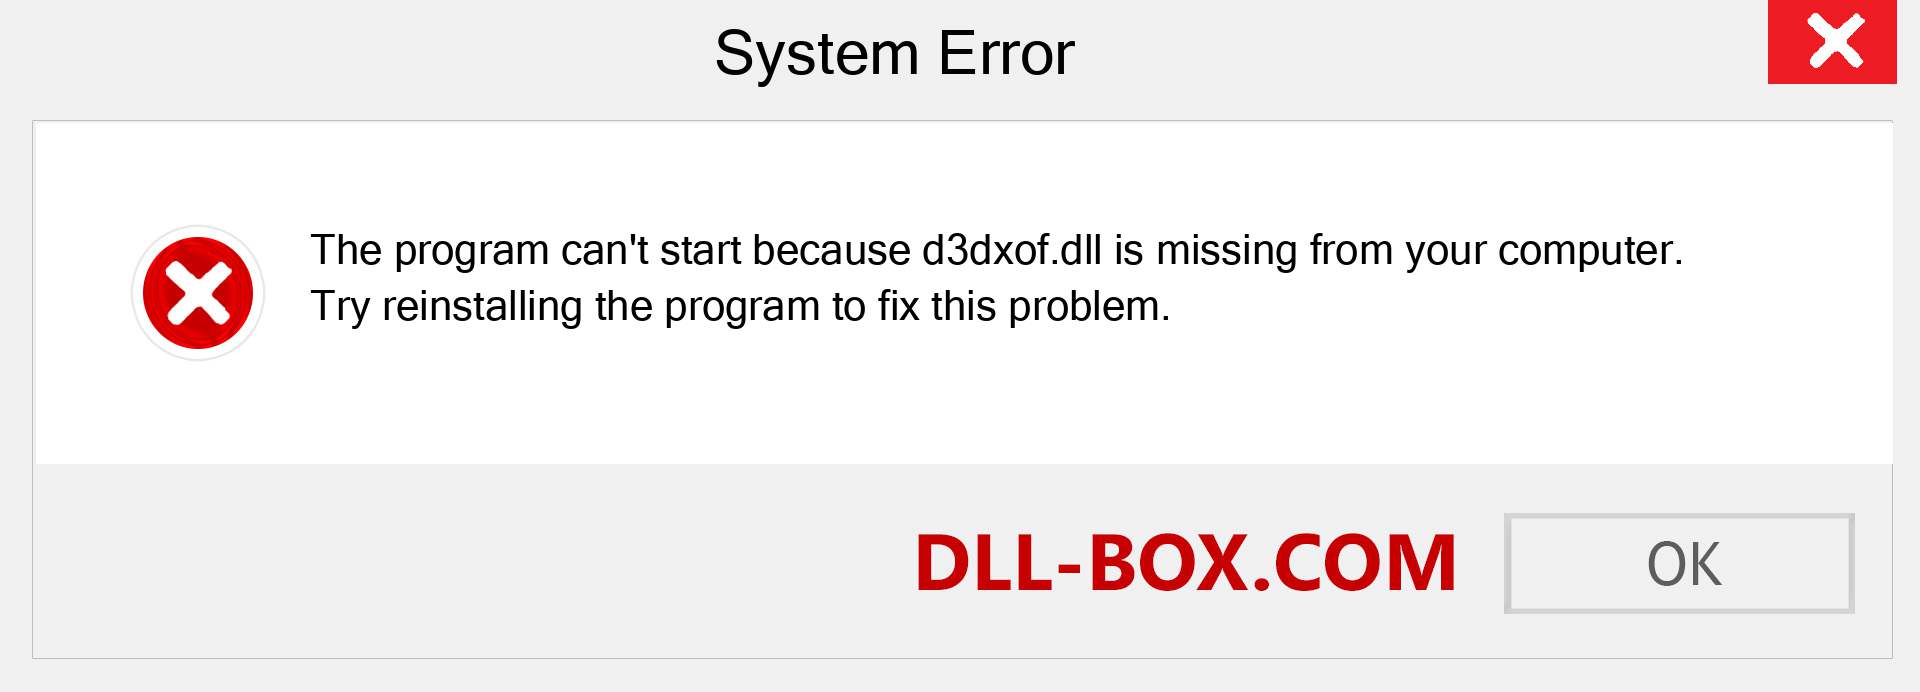  d3dxof.dll file is missing?. Download for Windows 7, 8, 10 - Fix  d3dxof dll Missing Error on Windows, photos, images